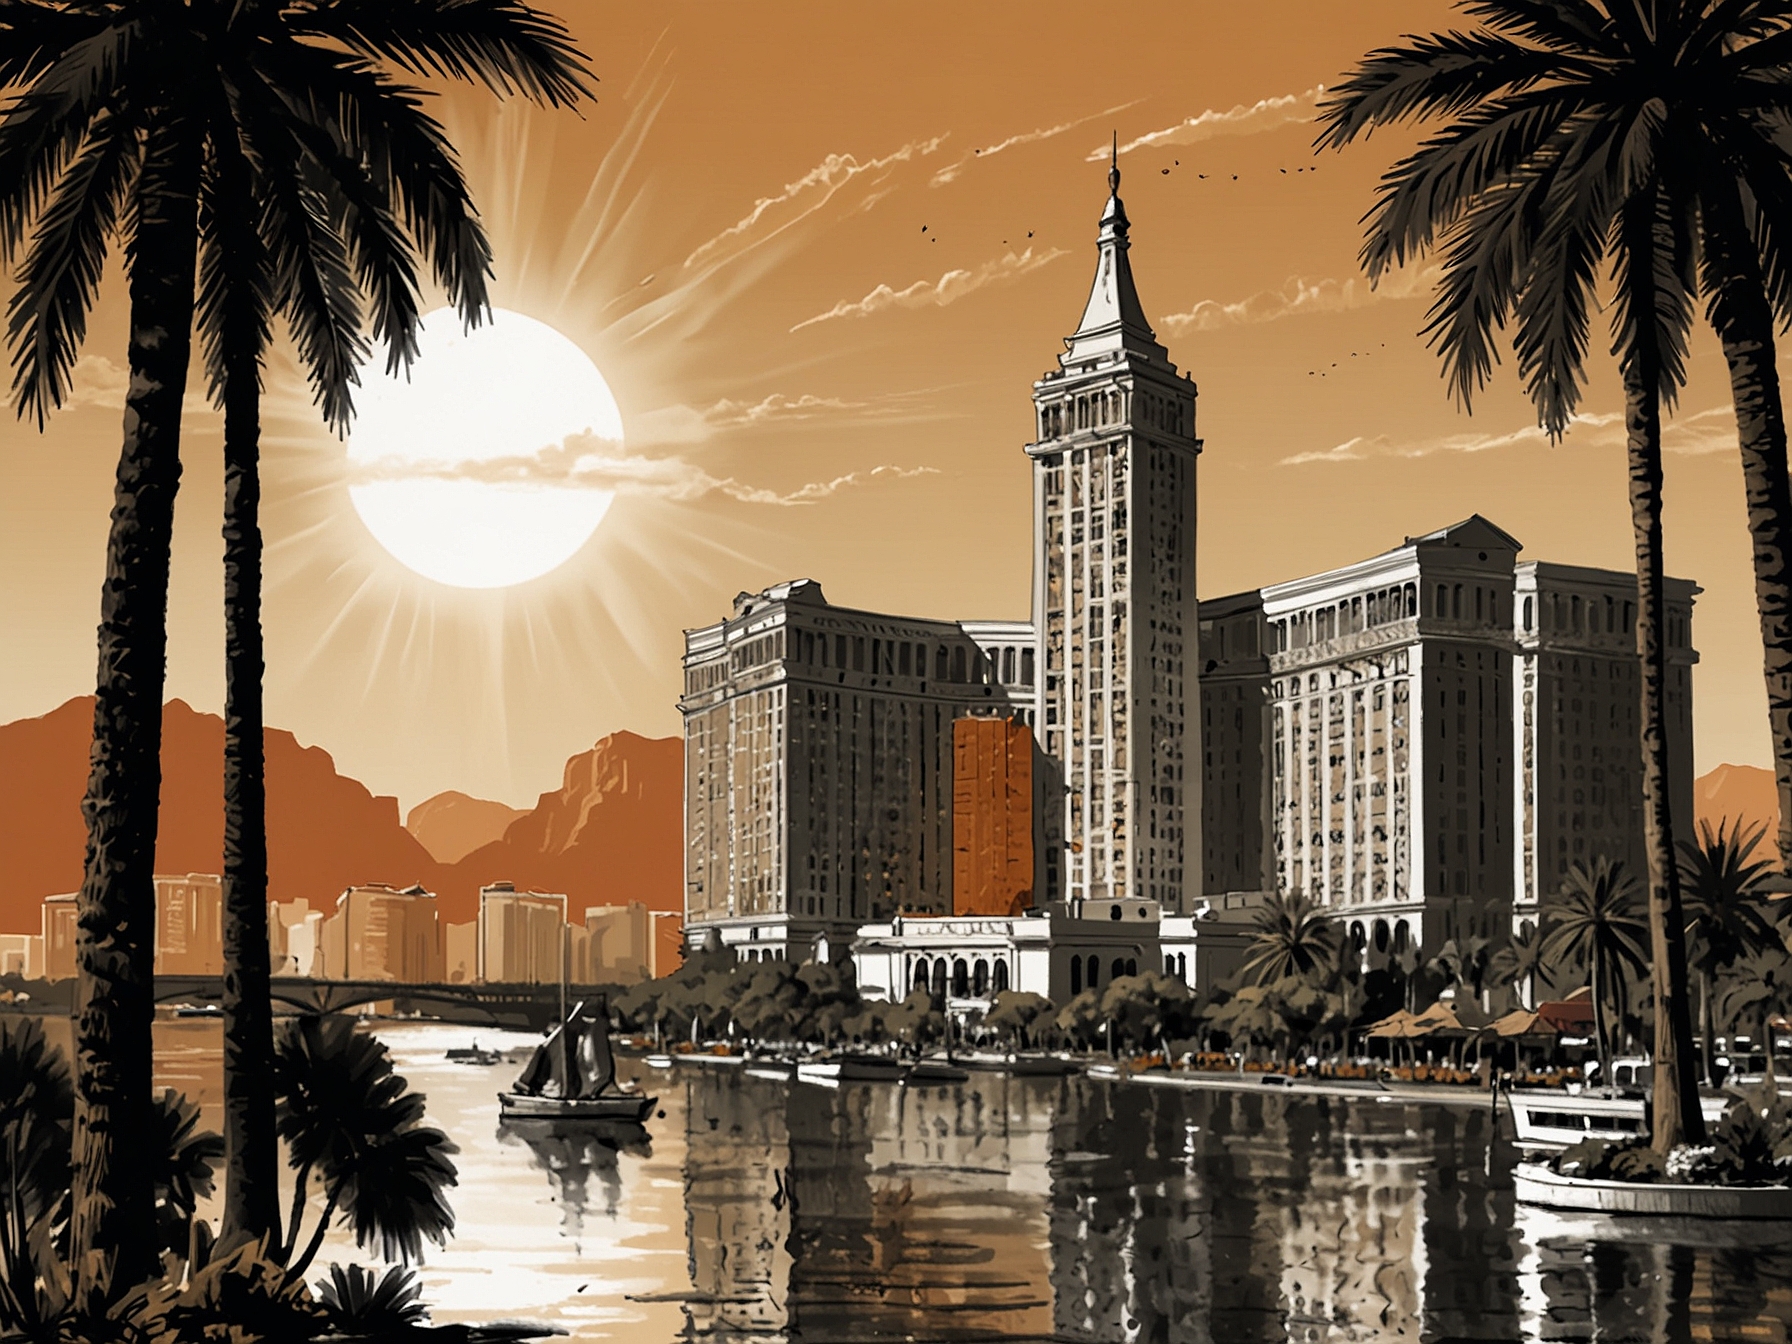 A stunning view of the Las Vegas Strip under the bright sun, showcasing the grandeur of luxury hotels like The Bellagio and The Venetian offering summer discounts.